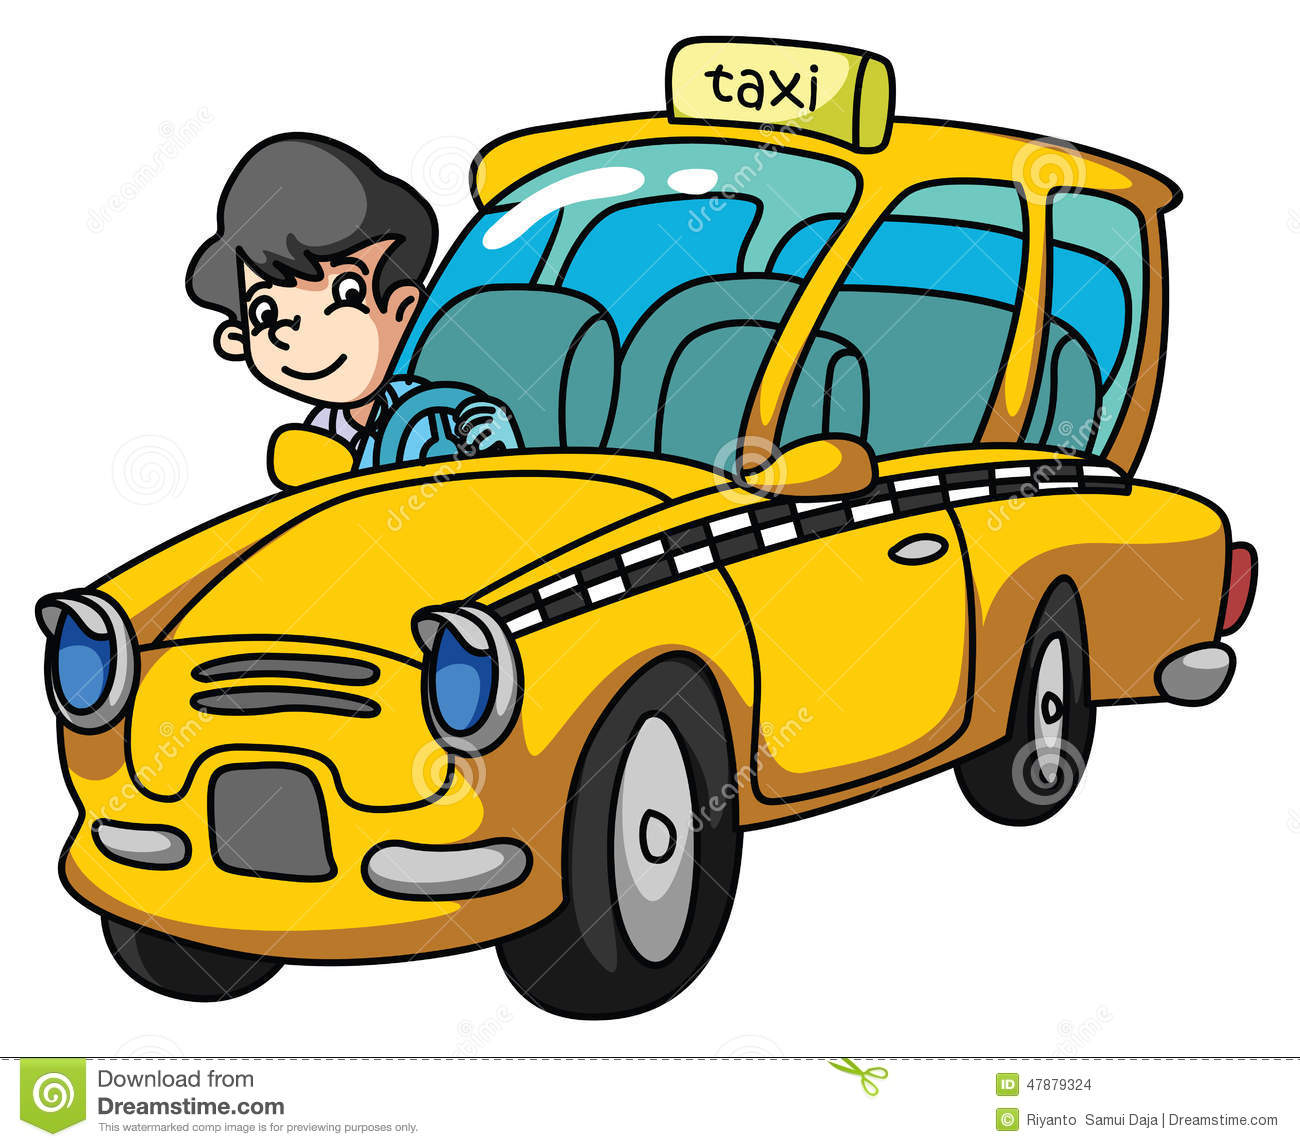 yellow cab clipart - photo #14